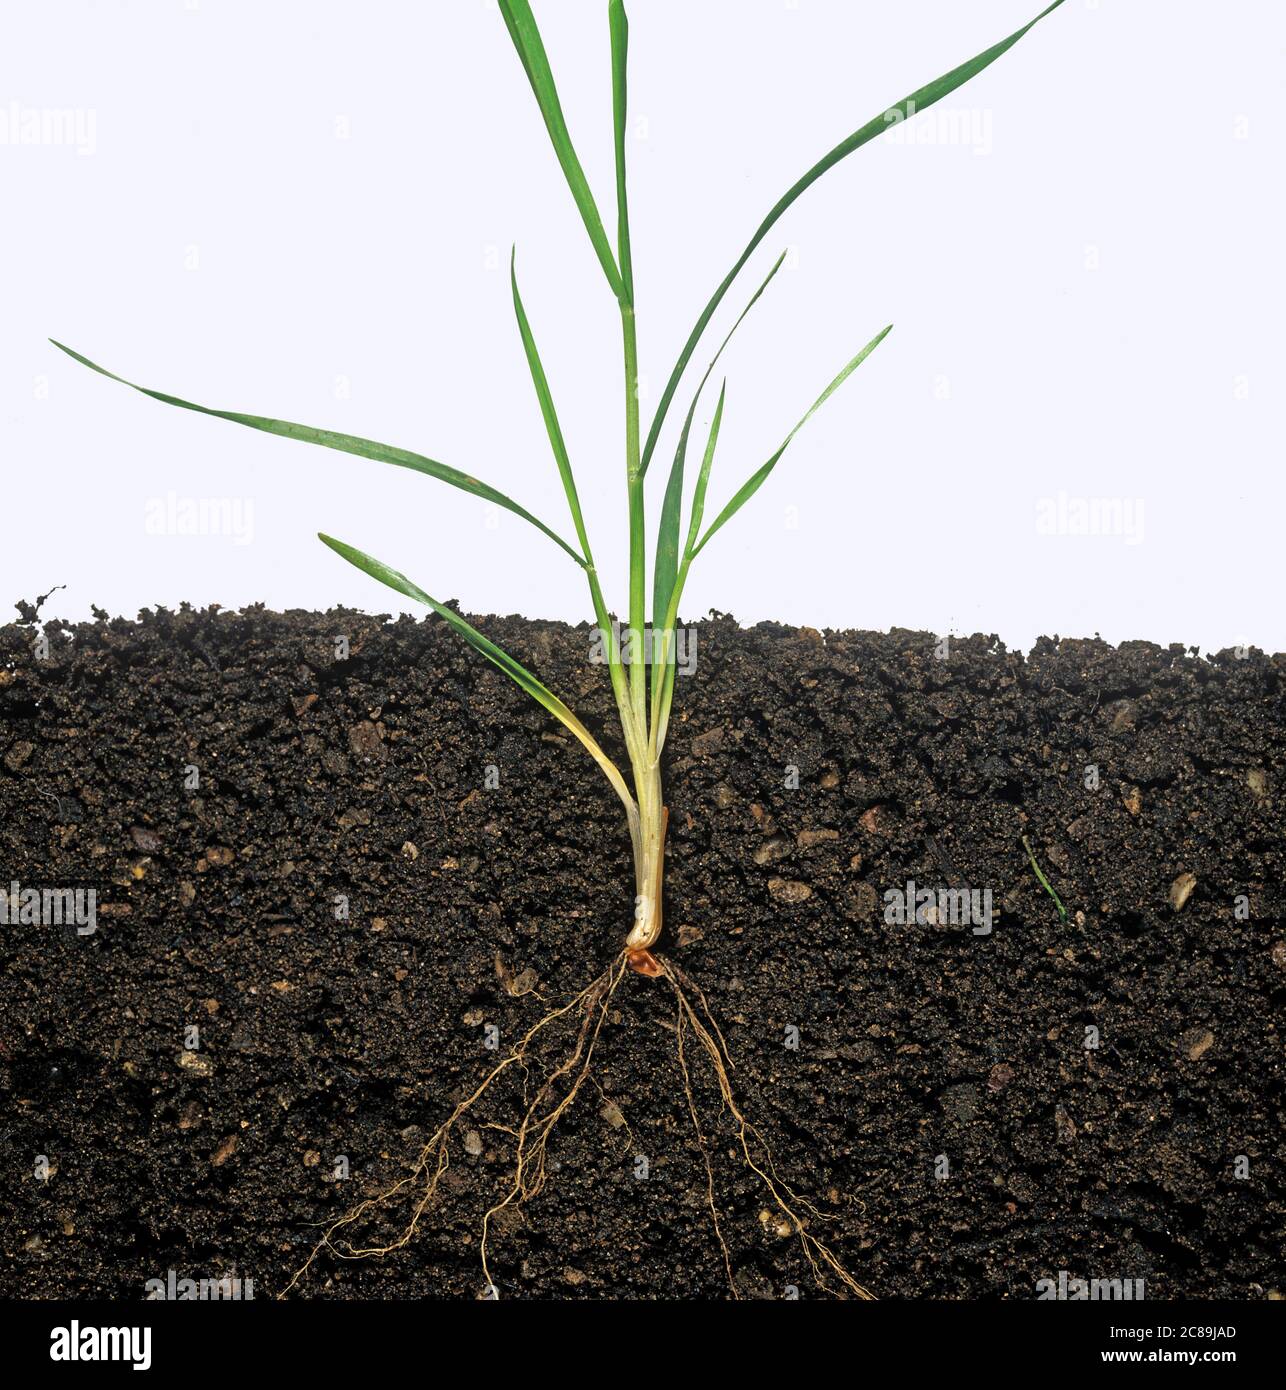 Wheat plant growth stage 21 with no sub-crown internode, shallow cultivation regime, Stock Photo